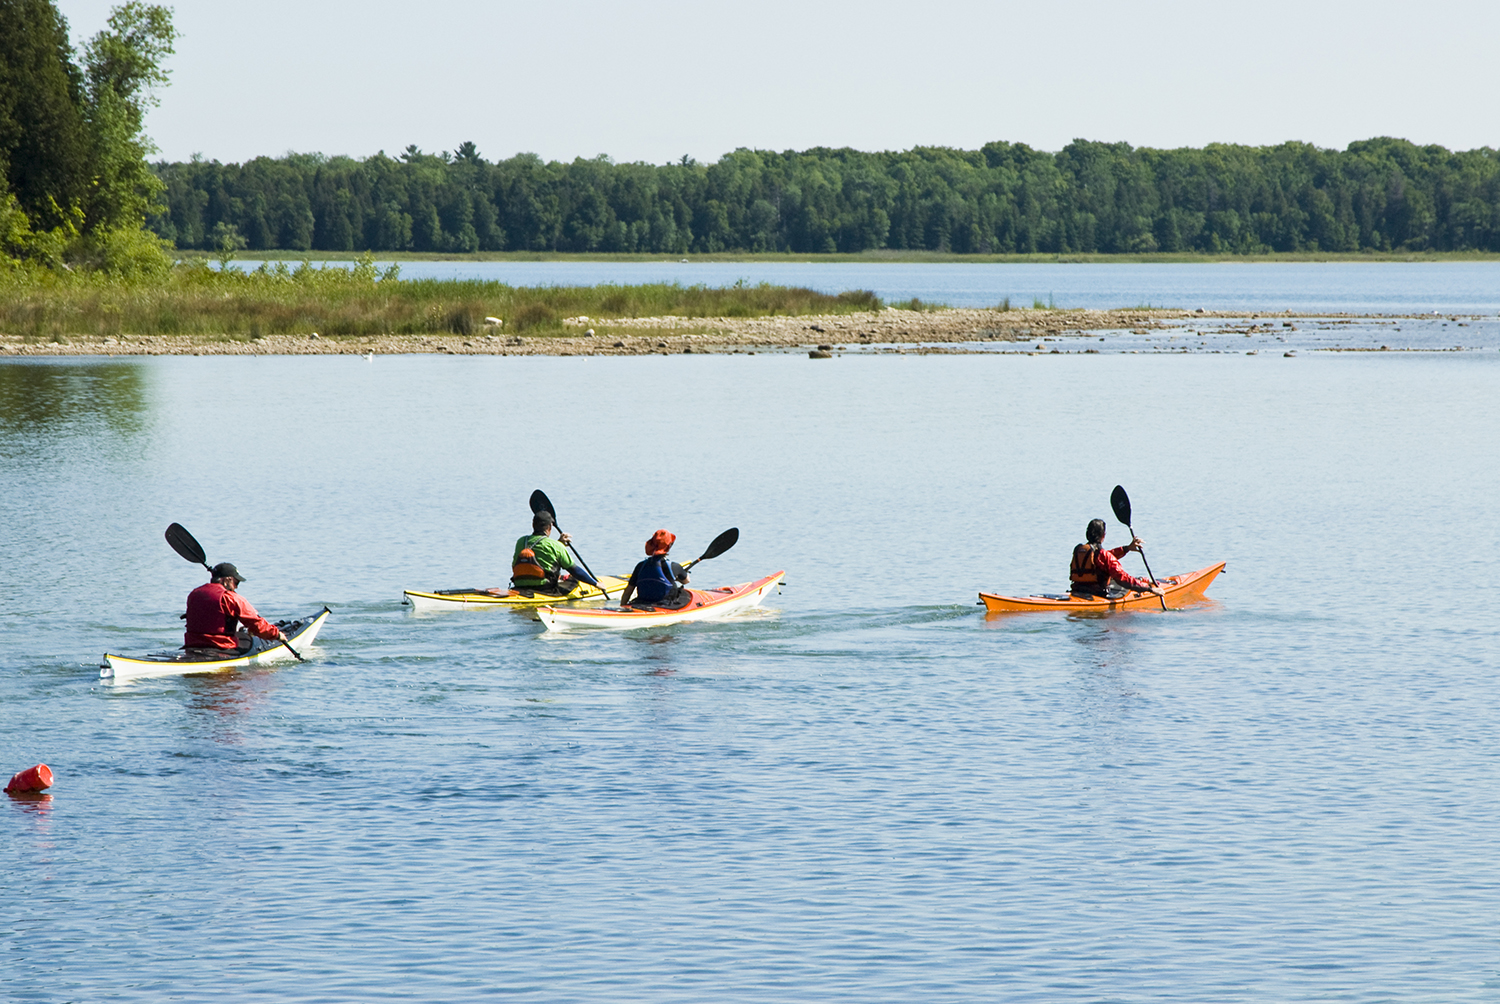 A group of kayakers set out onto a bay.